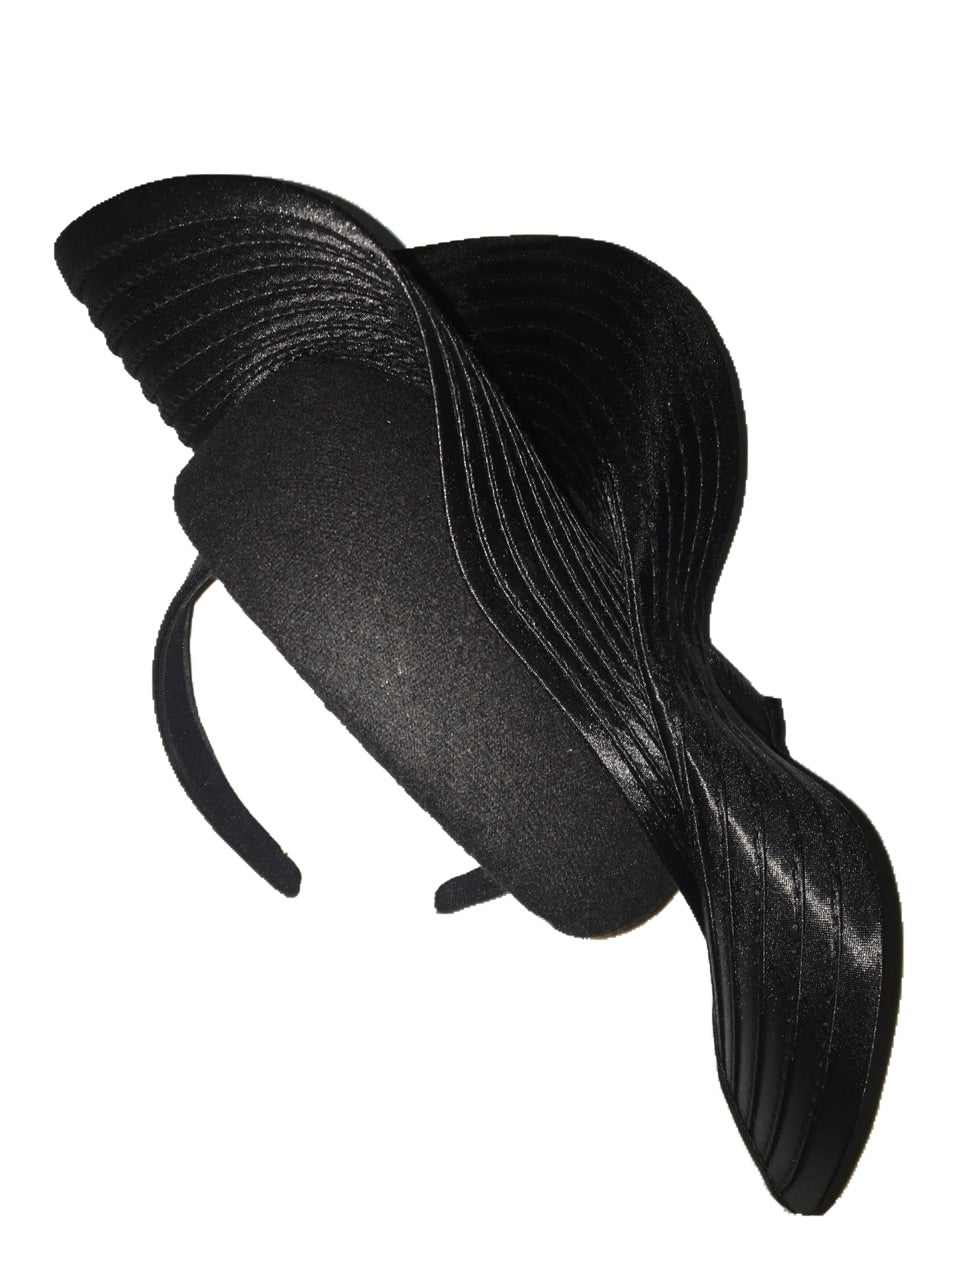 The Fillies Collection Black Felt Hat with a Structured Fold